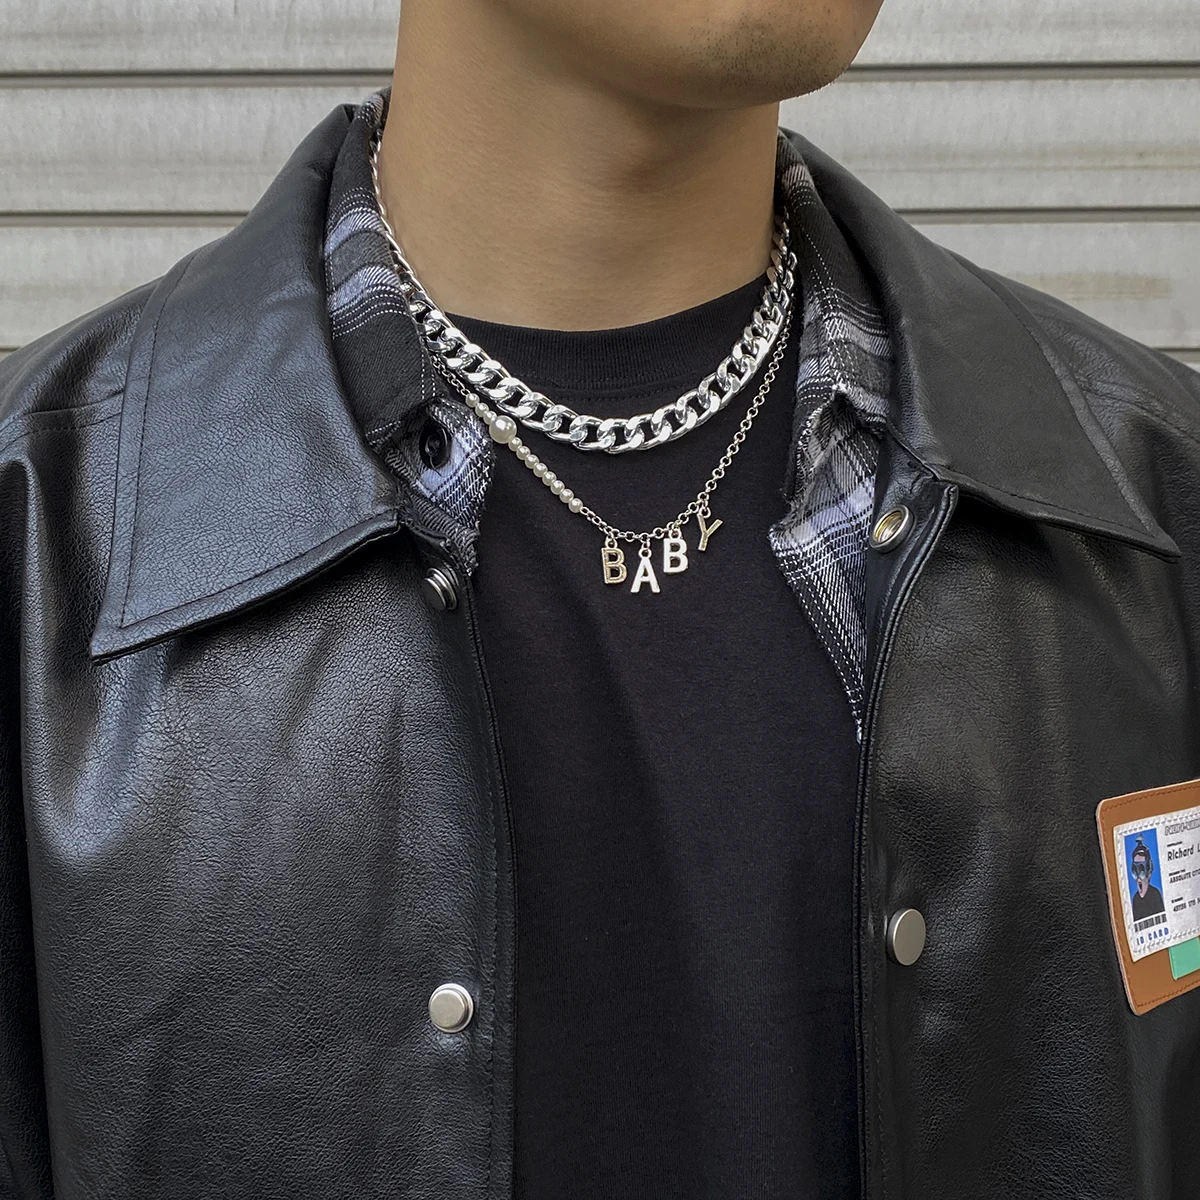 Купи Layered Chain with Letter Pendant Necklace for Men Thick Chains Choker Necklace 2023 Fashion Jewelry Neck Accessories Male Gifts за 247 рублей в магазине AliExpress